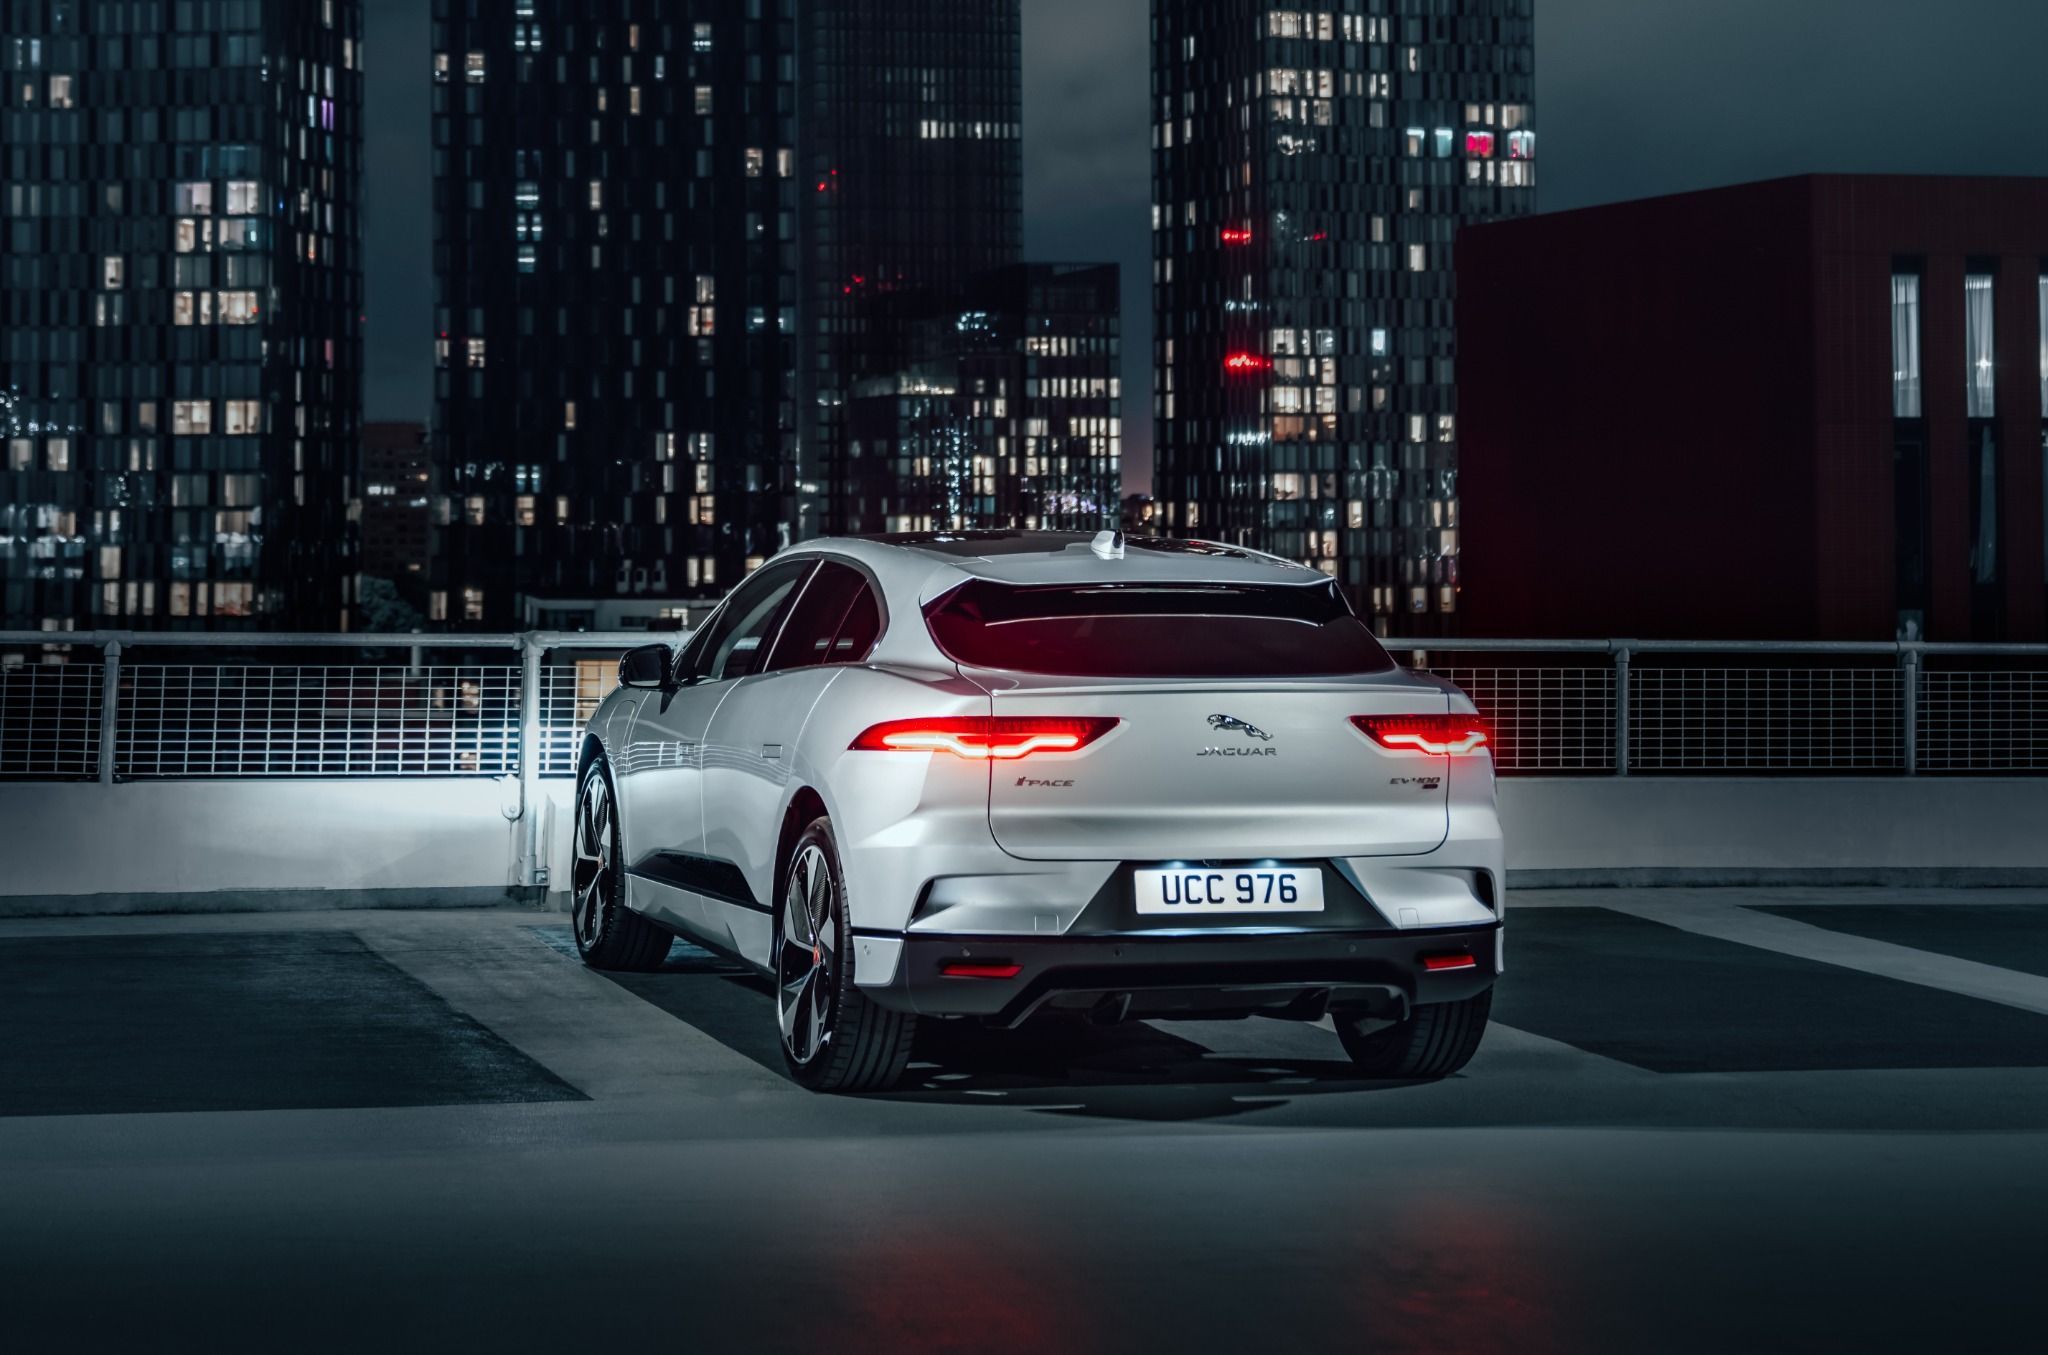 Rear view of a silver Jaguar I-Pace at night